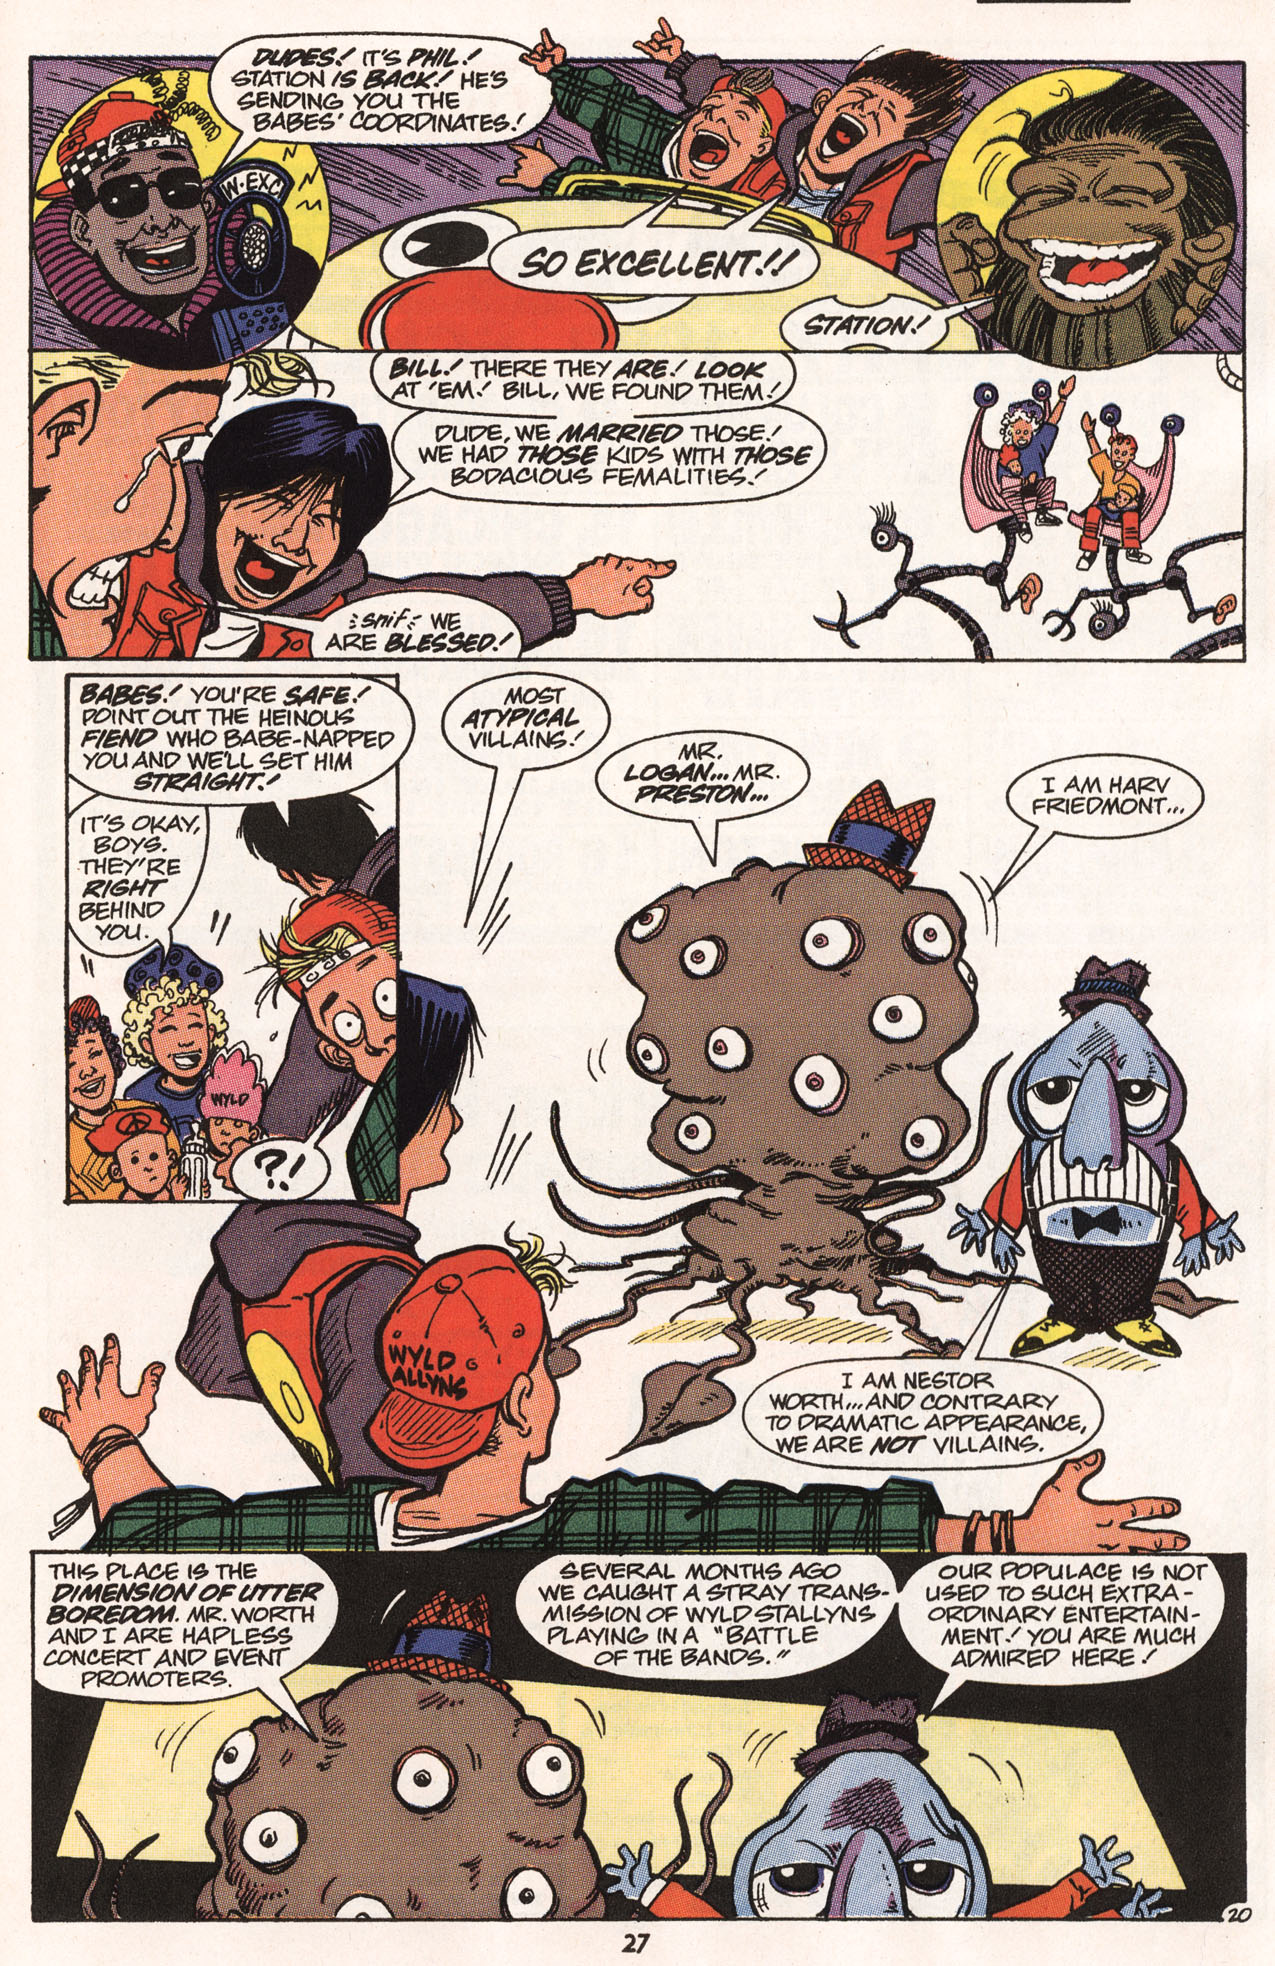 Bill & Teds Excellent Comic Book 4 Page 26